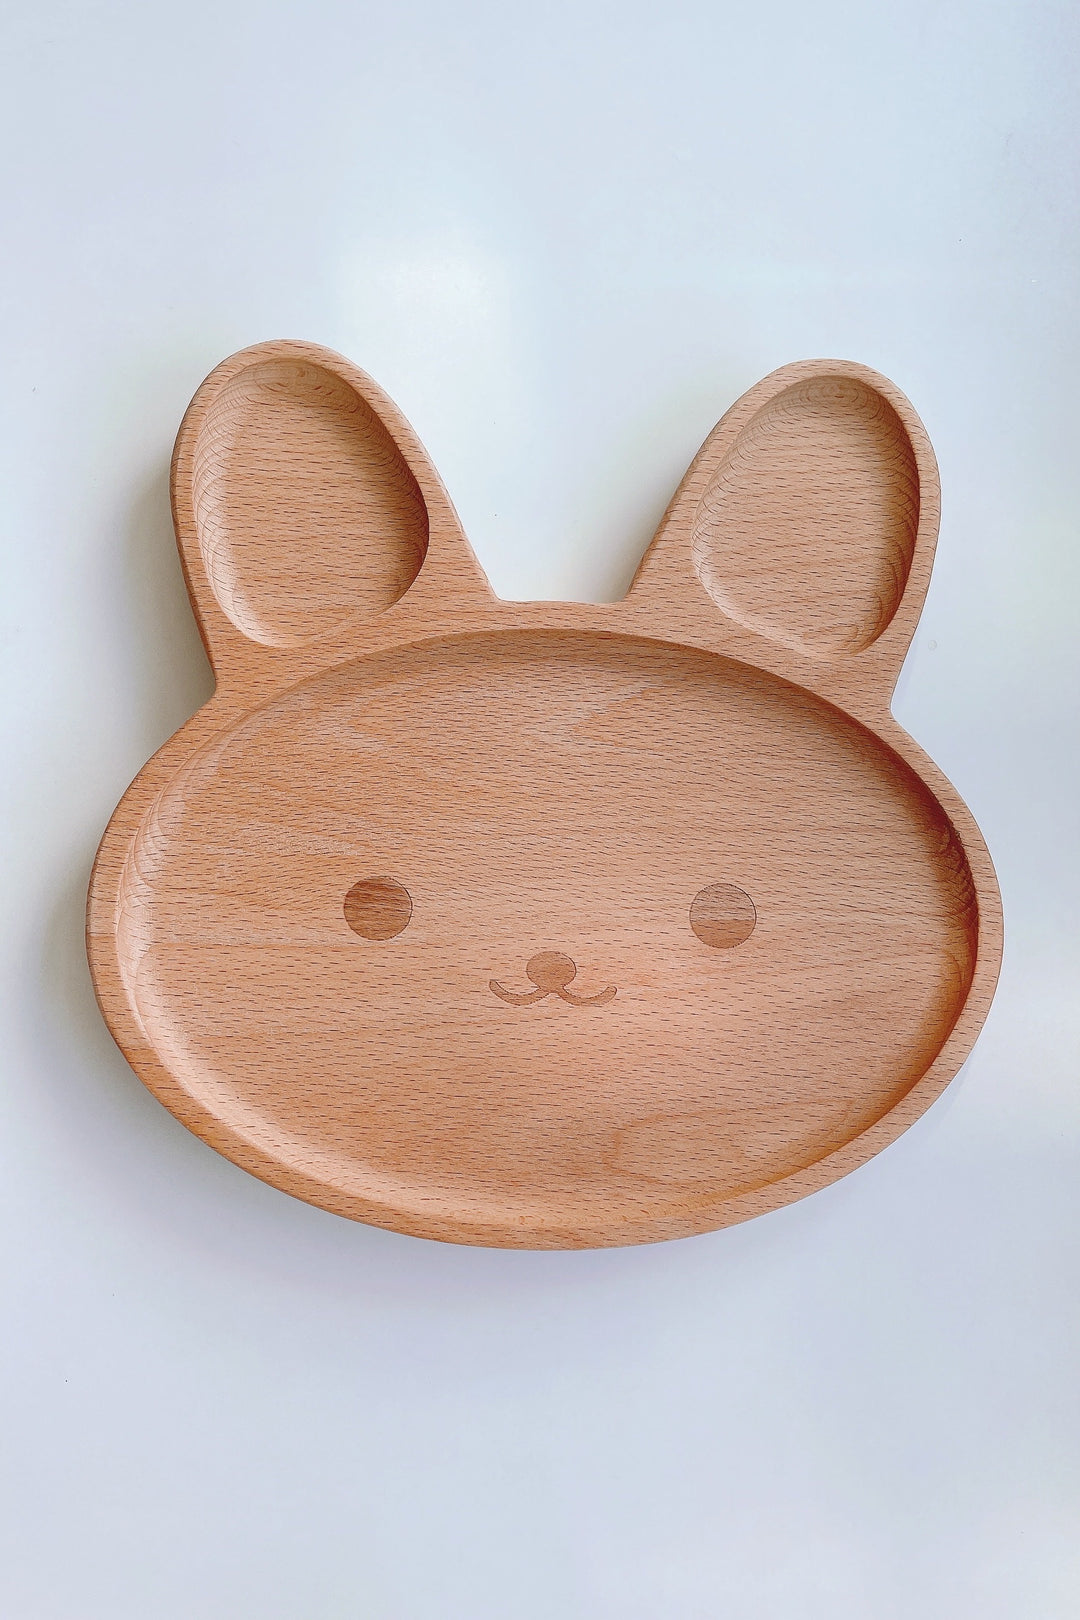 Bunny Wooden Plates (2 options)